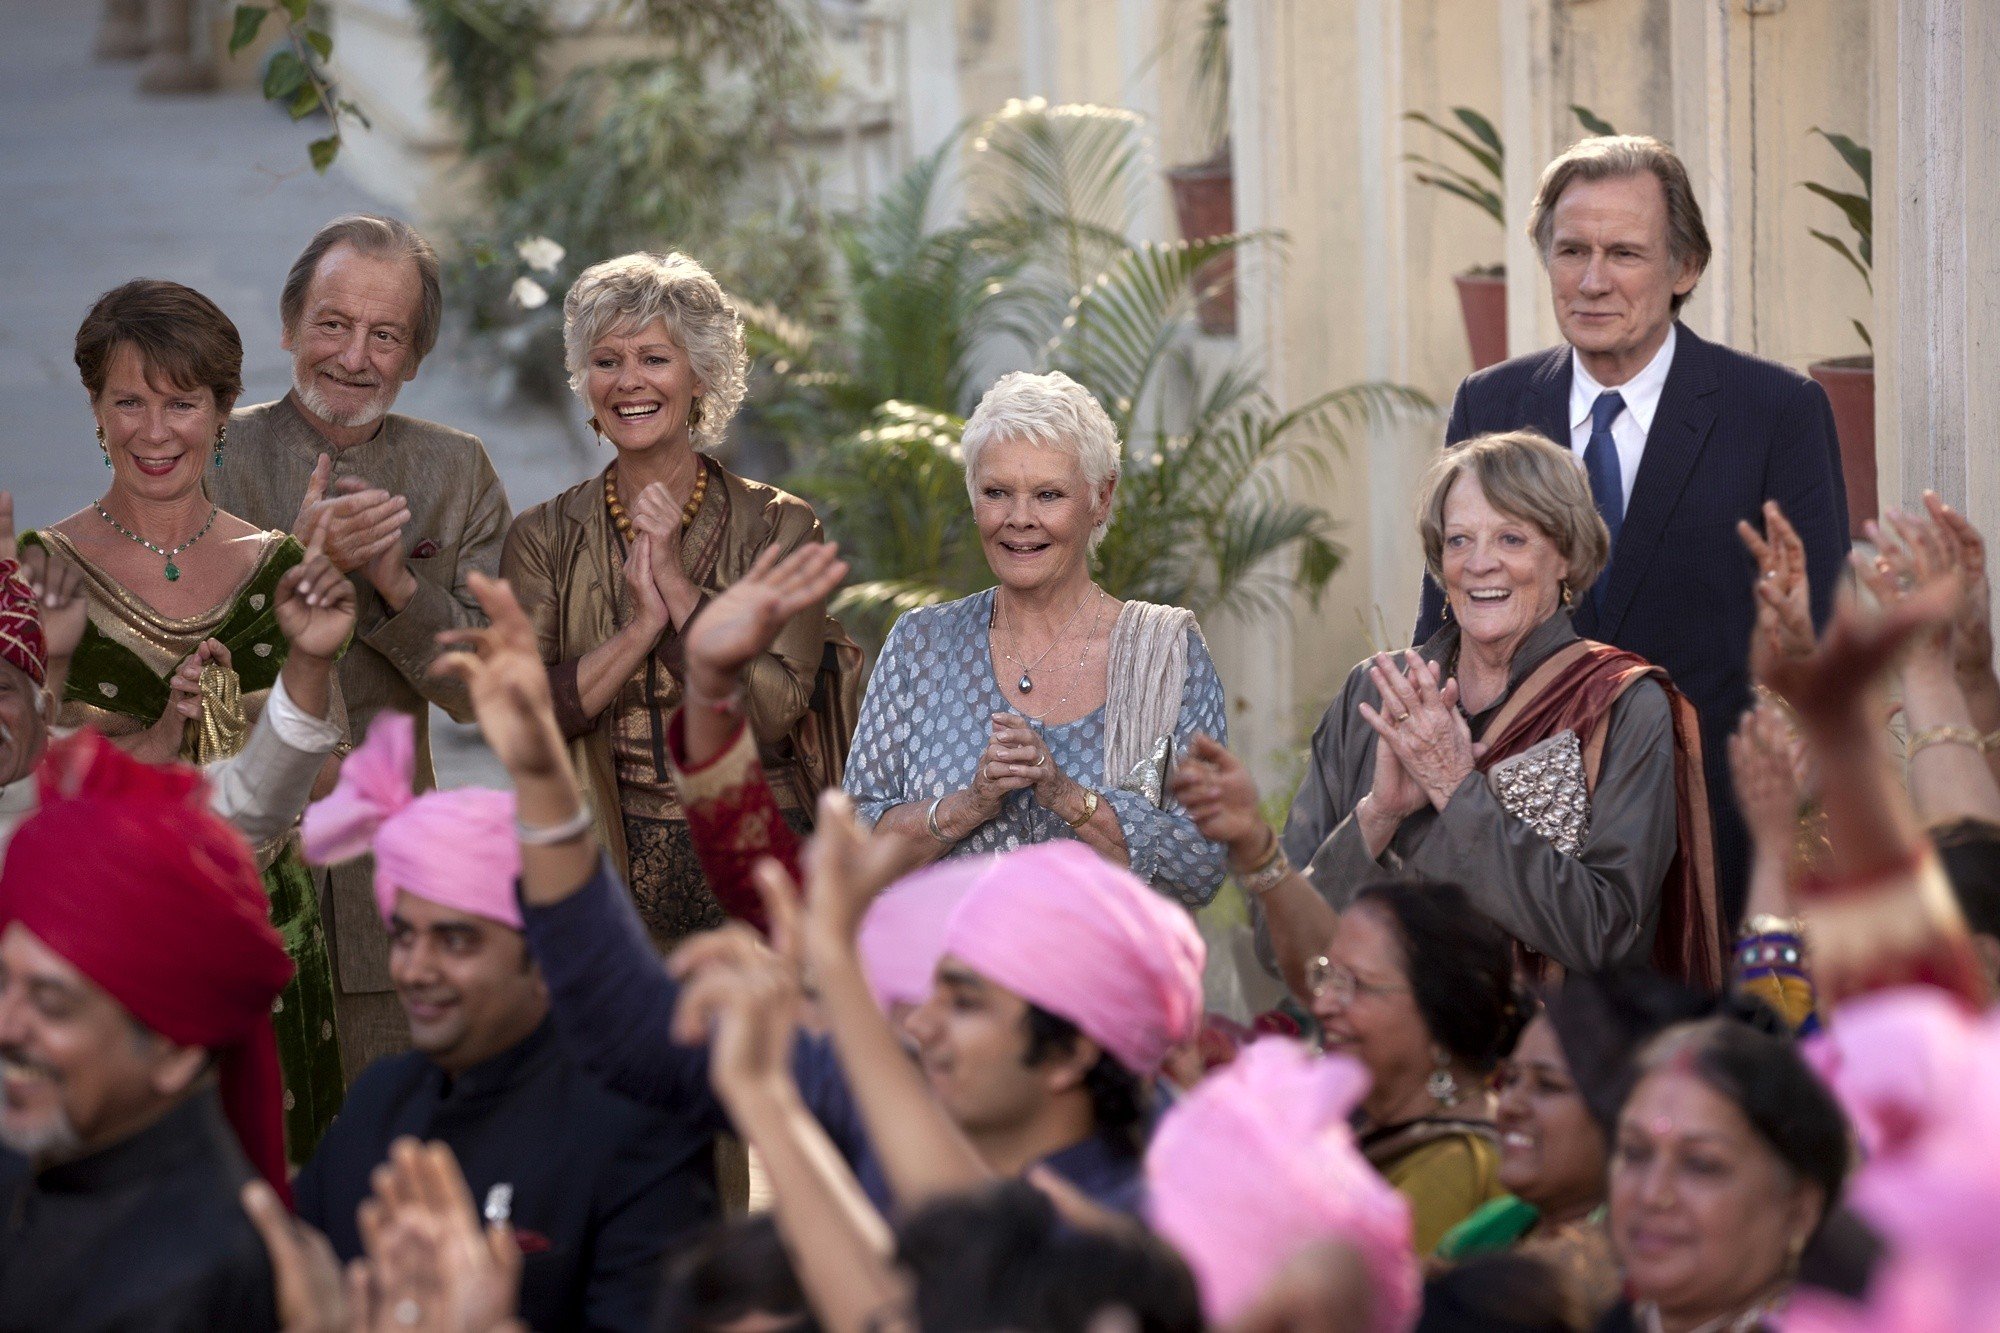 Celia Imrie, Ronald Pickup, Diana Hardcastle, Judi Dench, Maggie Smith and Bill Nighy in Fox Searchlight Pictures' The Second Best Exotic Marigold Hotel (2015). Photo credit by Laurie Sparham.